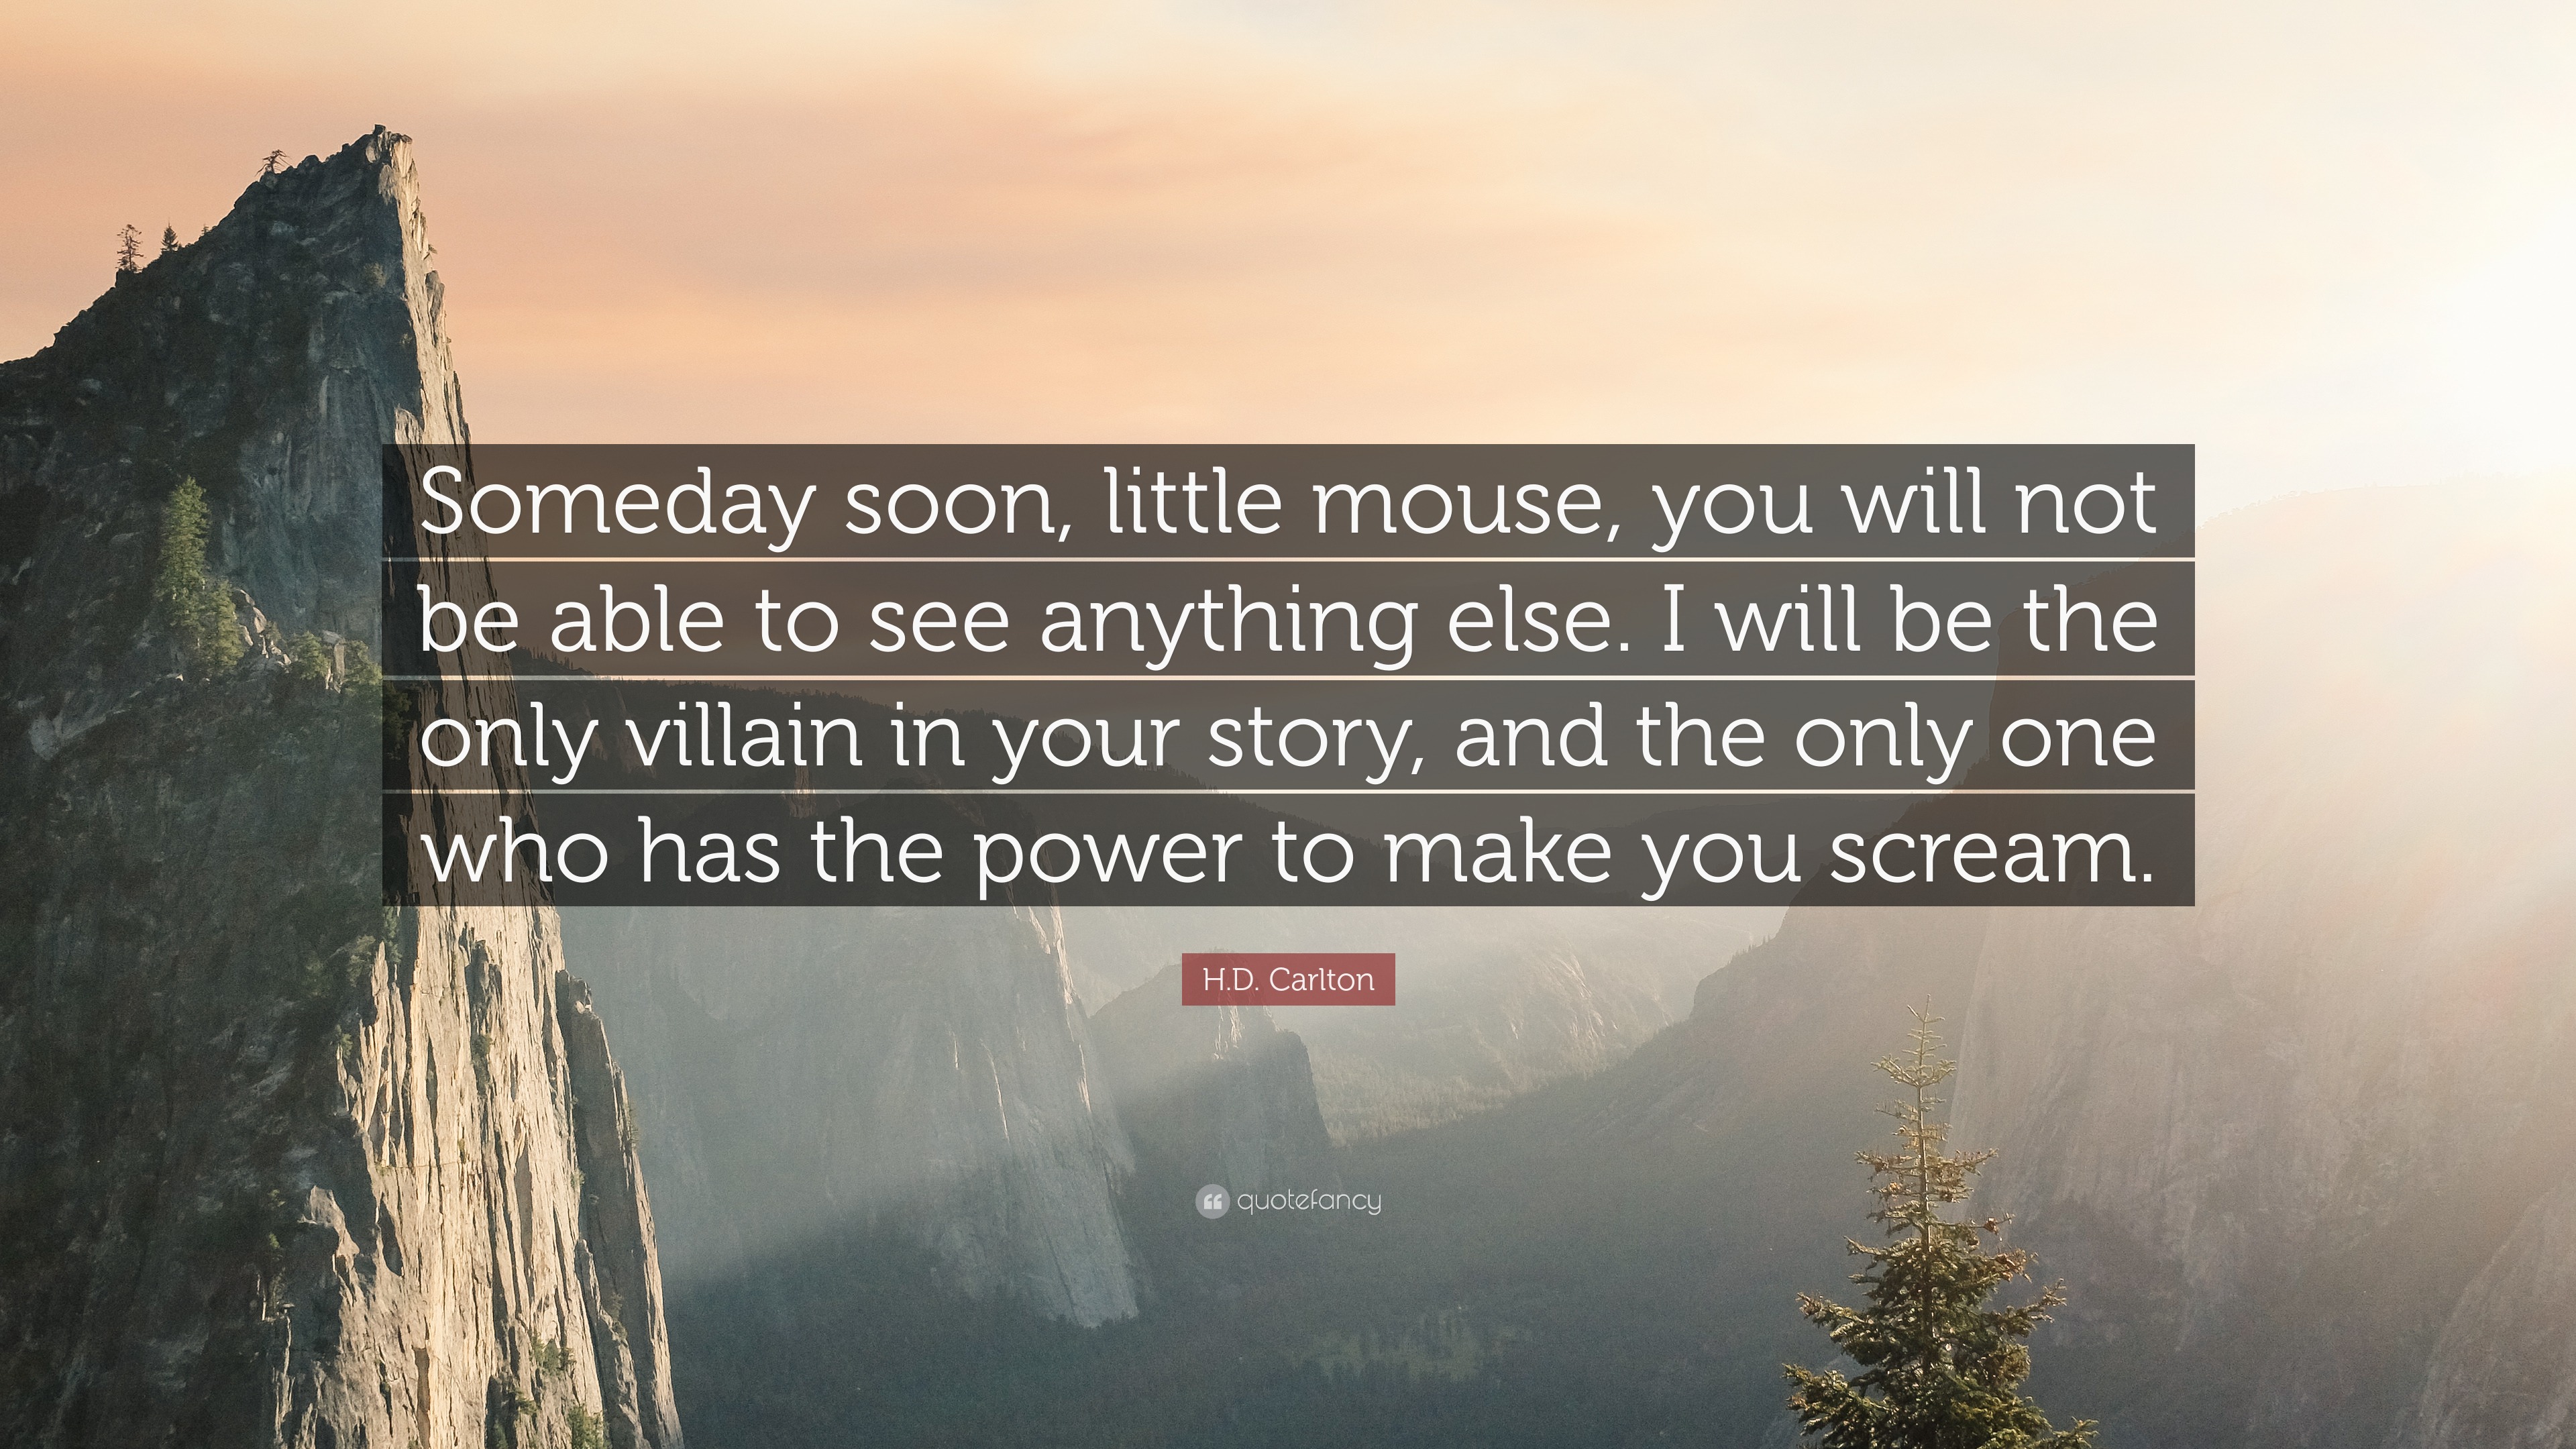 H.D. Carlton Quote: “Someday soon, little mouse, you will not be